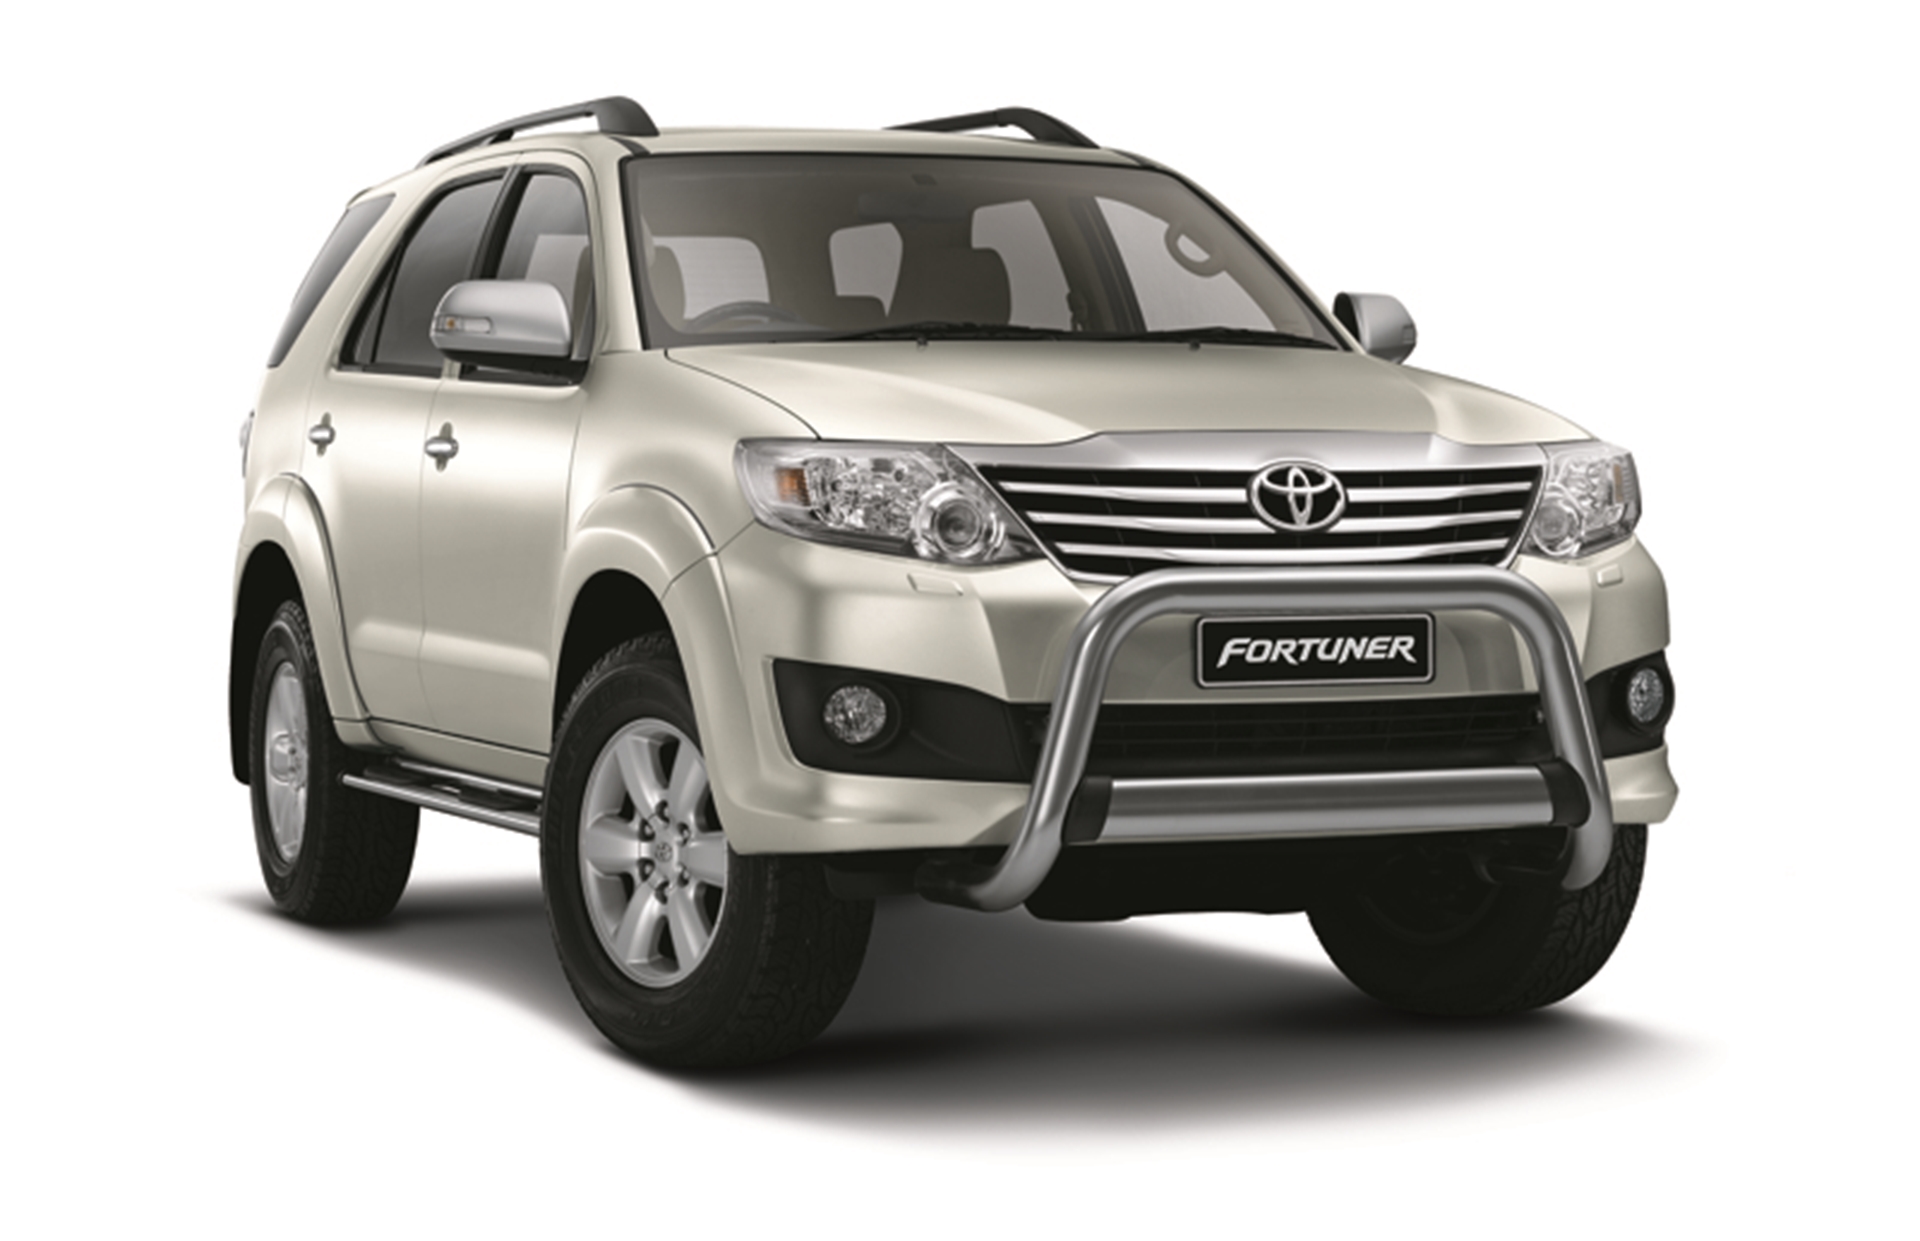 POPULAR TOYOTA FORTUNER RANGE EXPANDED AND FURTHER REFINED